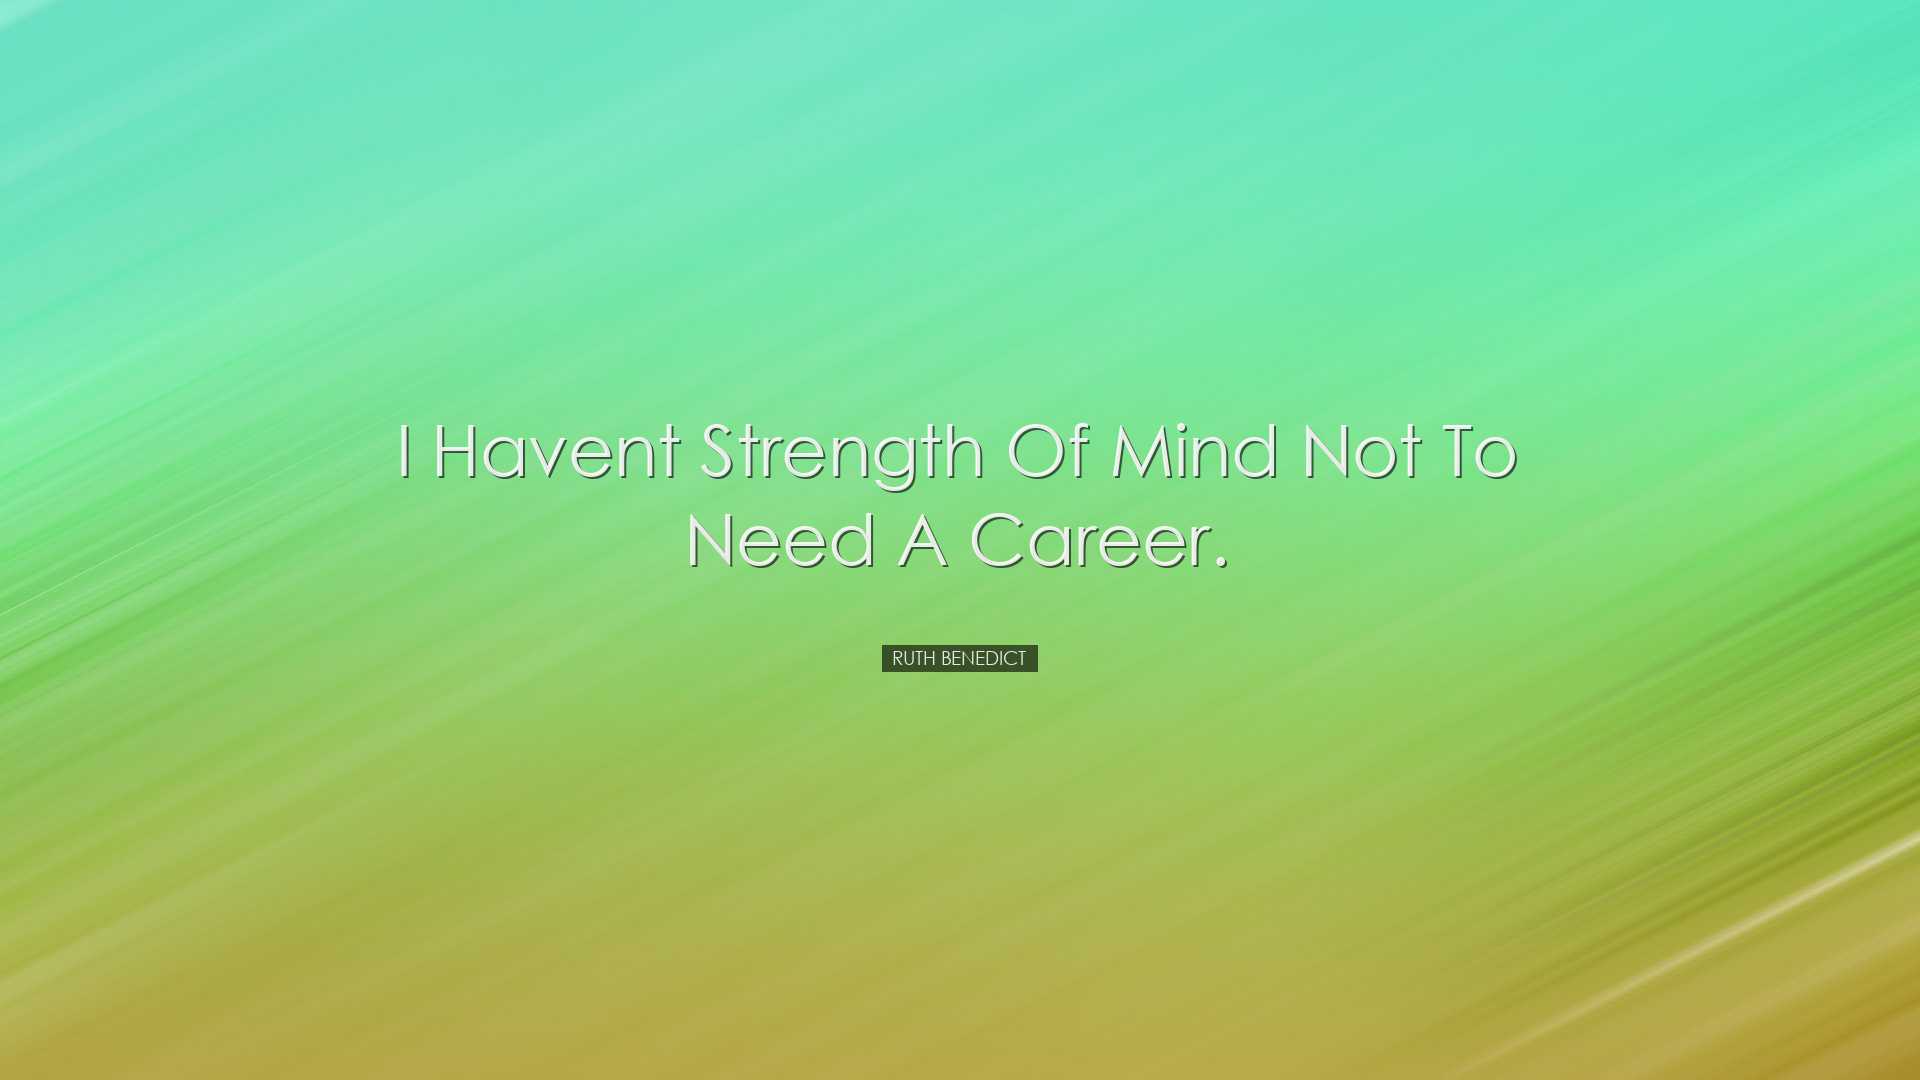 I havent strength of mind not to need a career. - Ruth Benedict